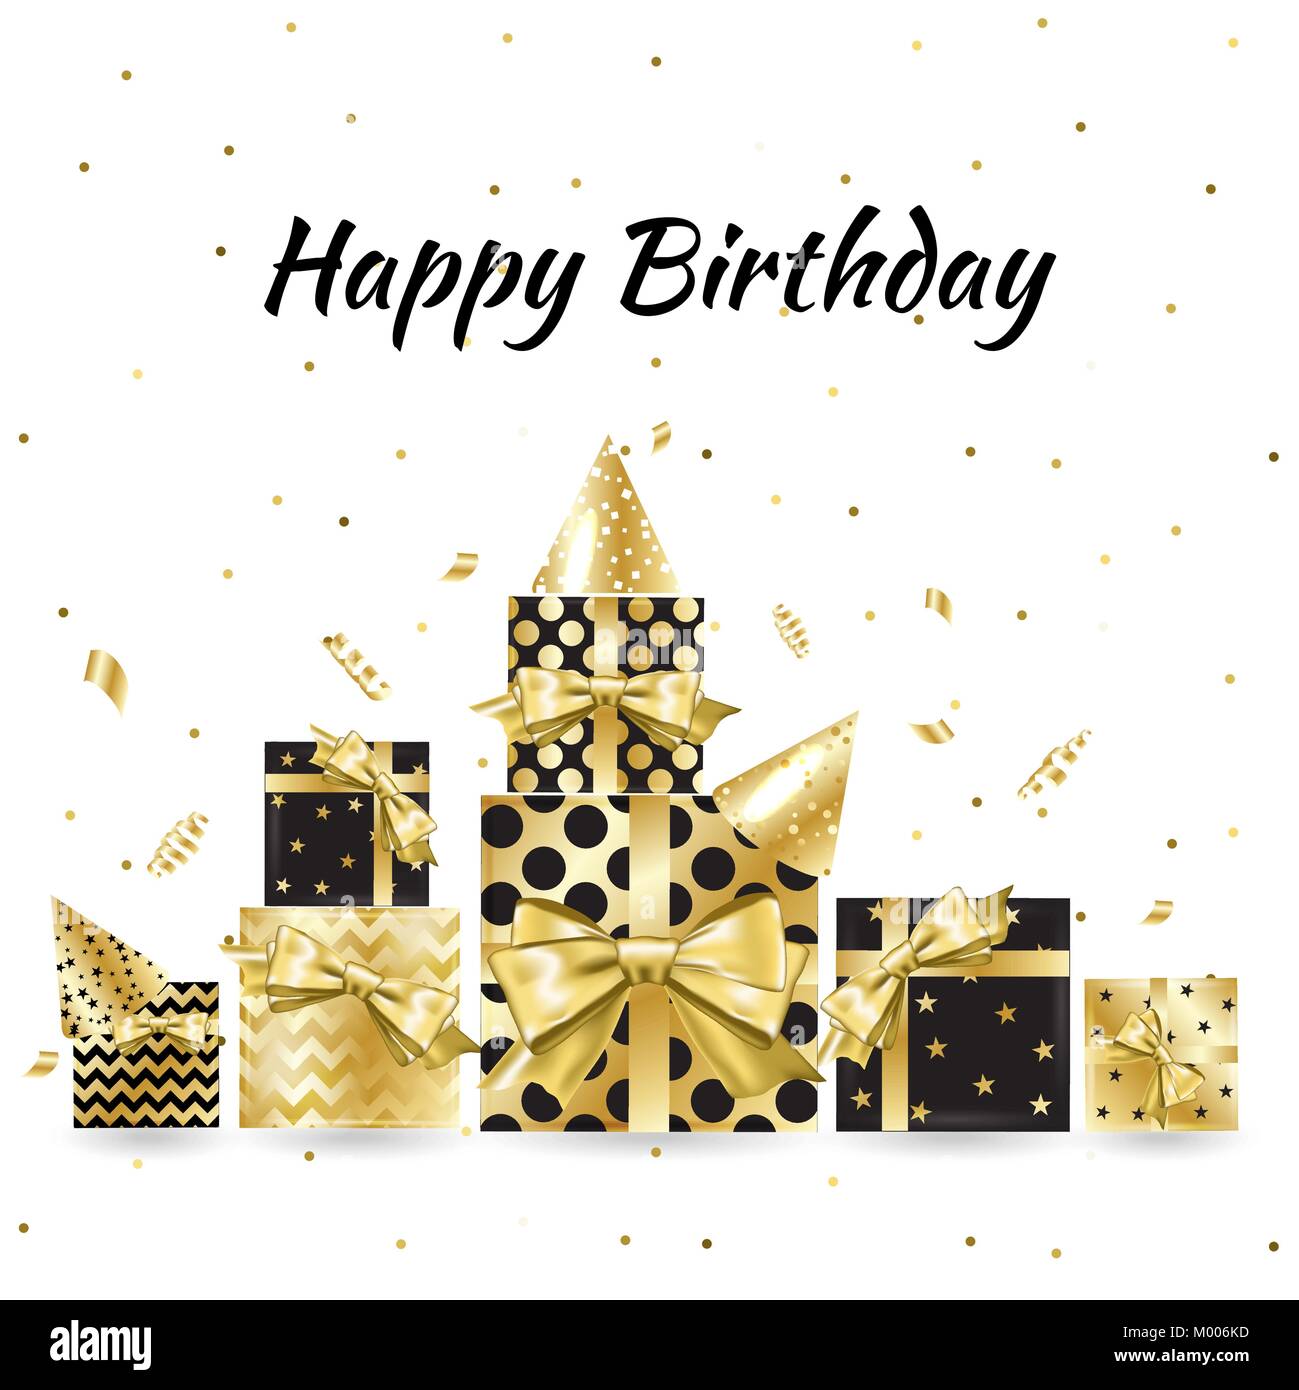 Gold gift boxes and confetti on black background. Birthday template. Stock Vector